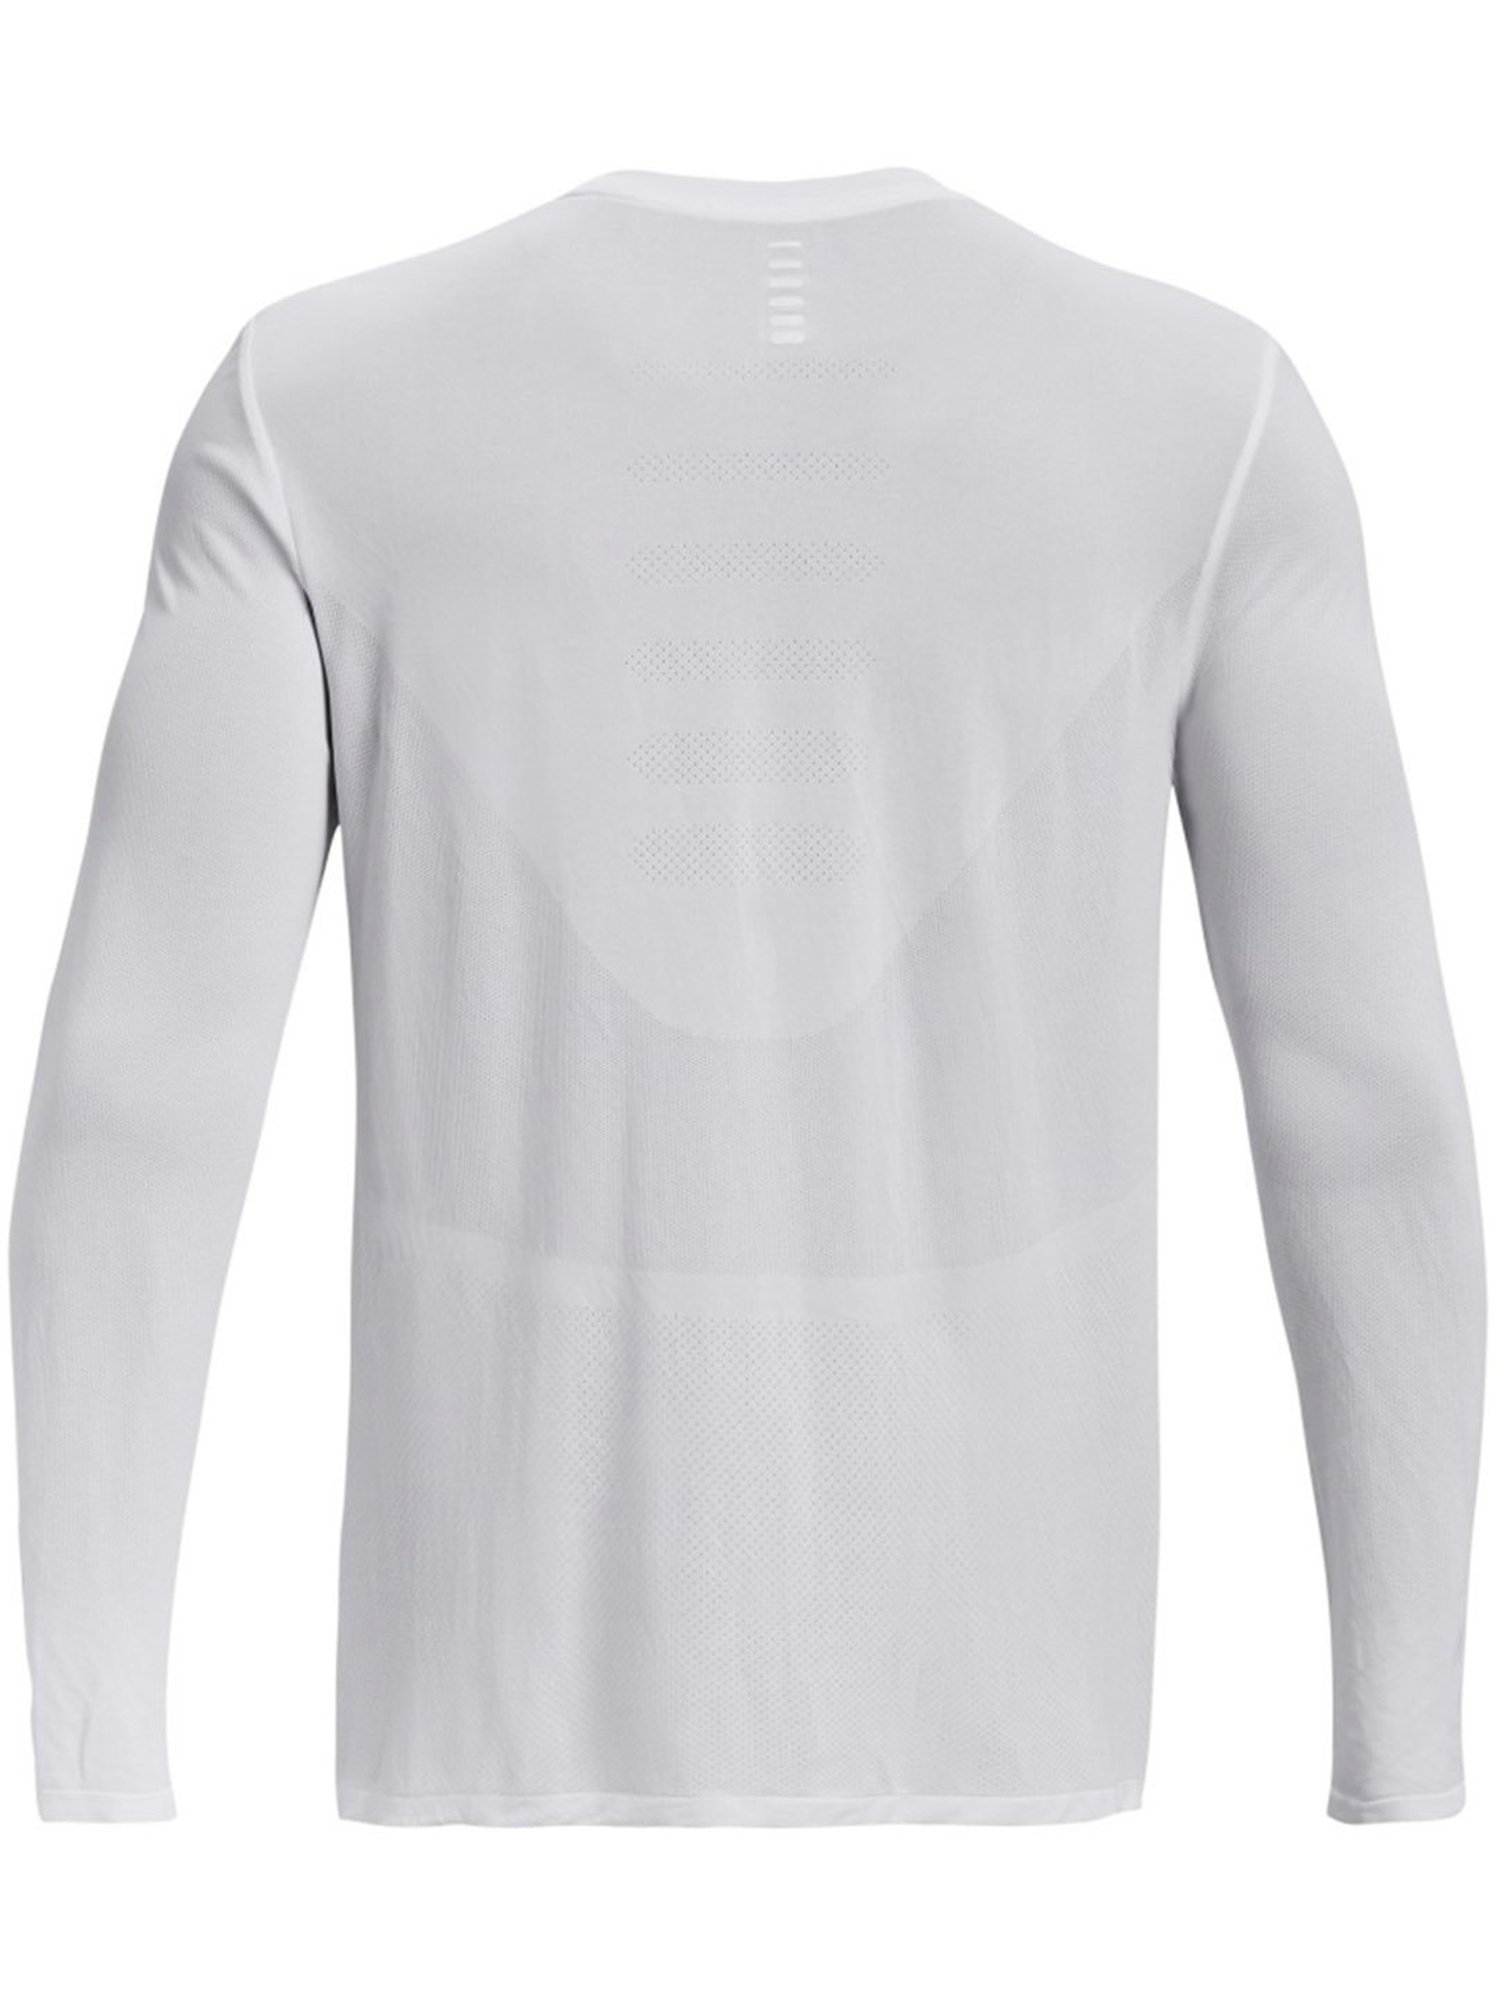 Under Armour White Cotton Regular Fit Printed Sports T-Shirt